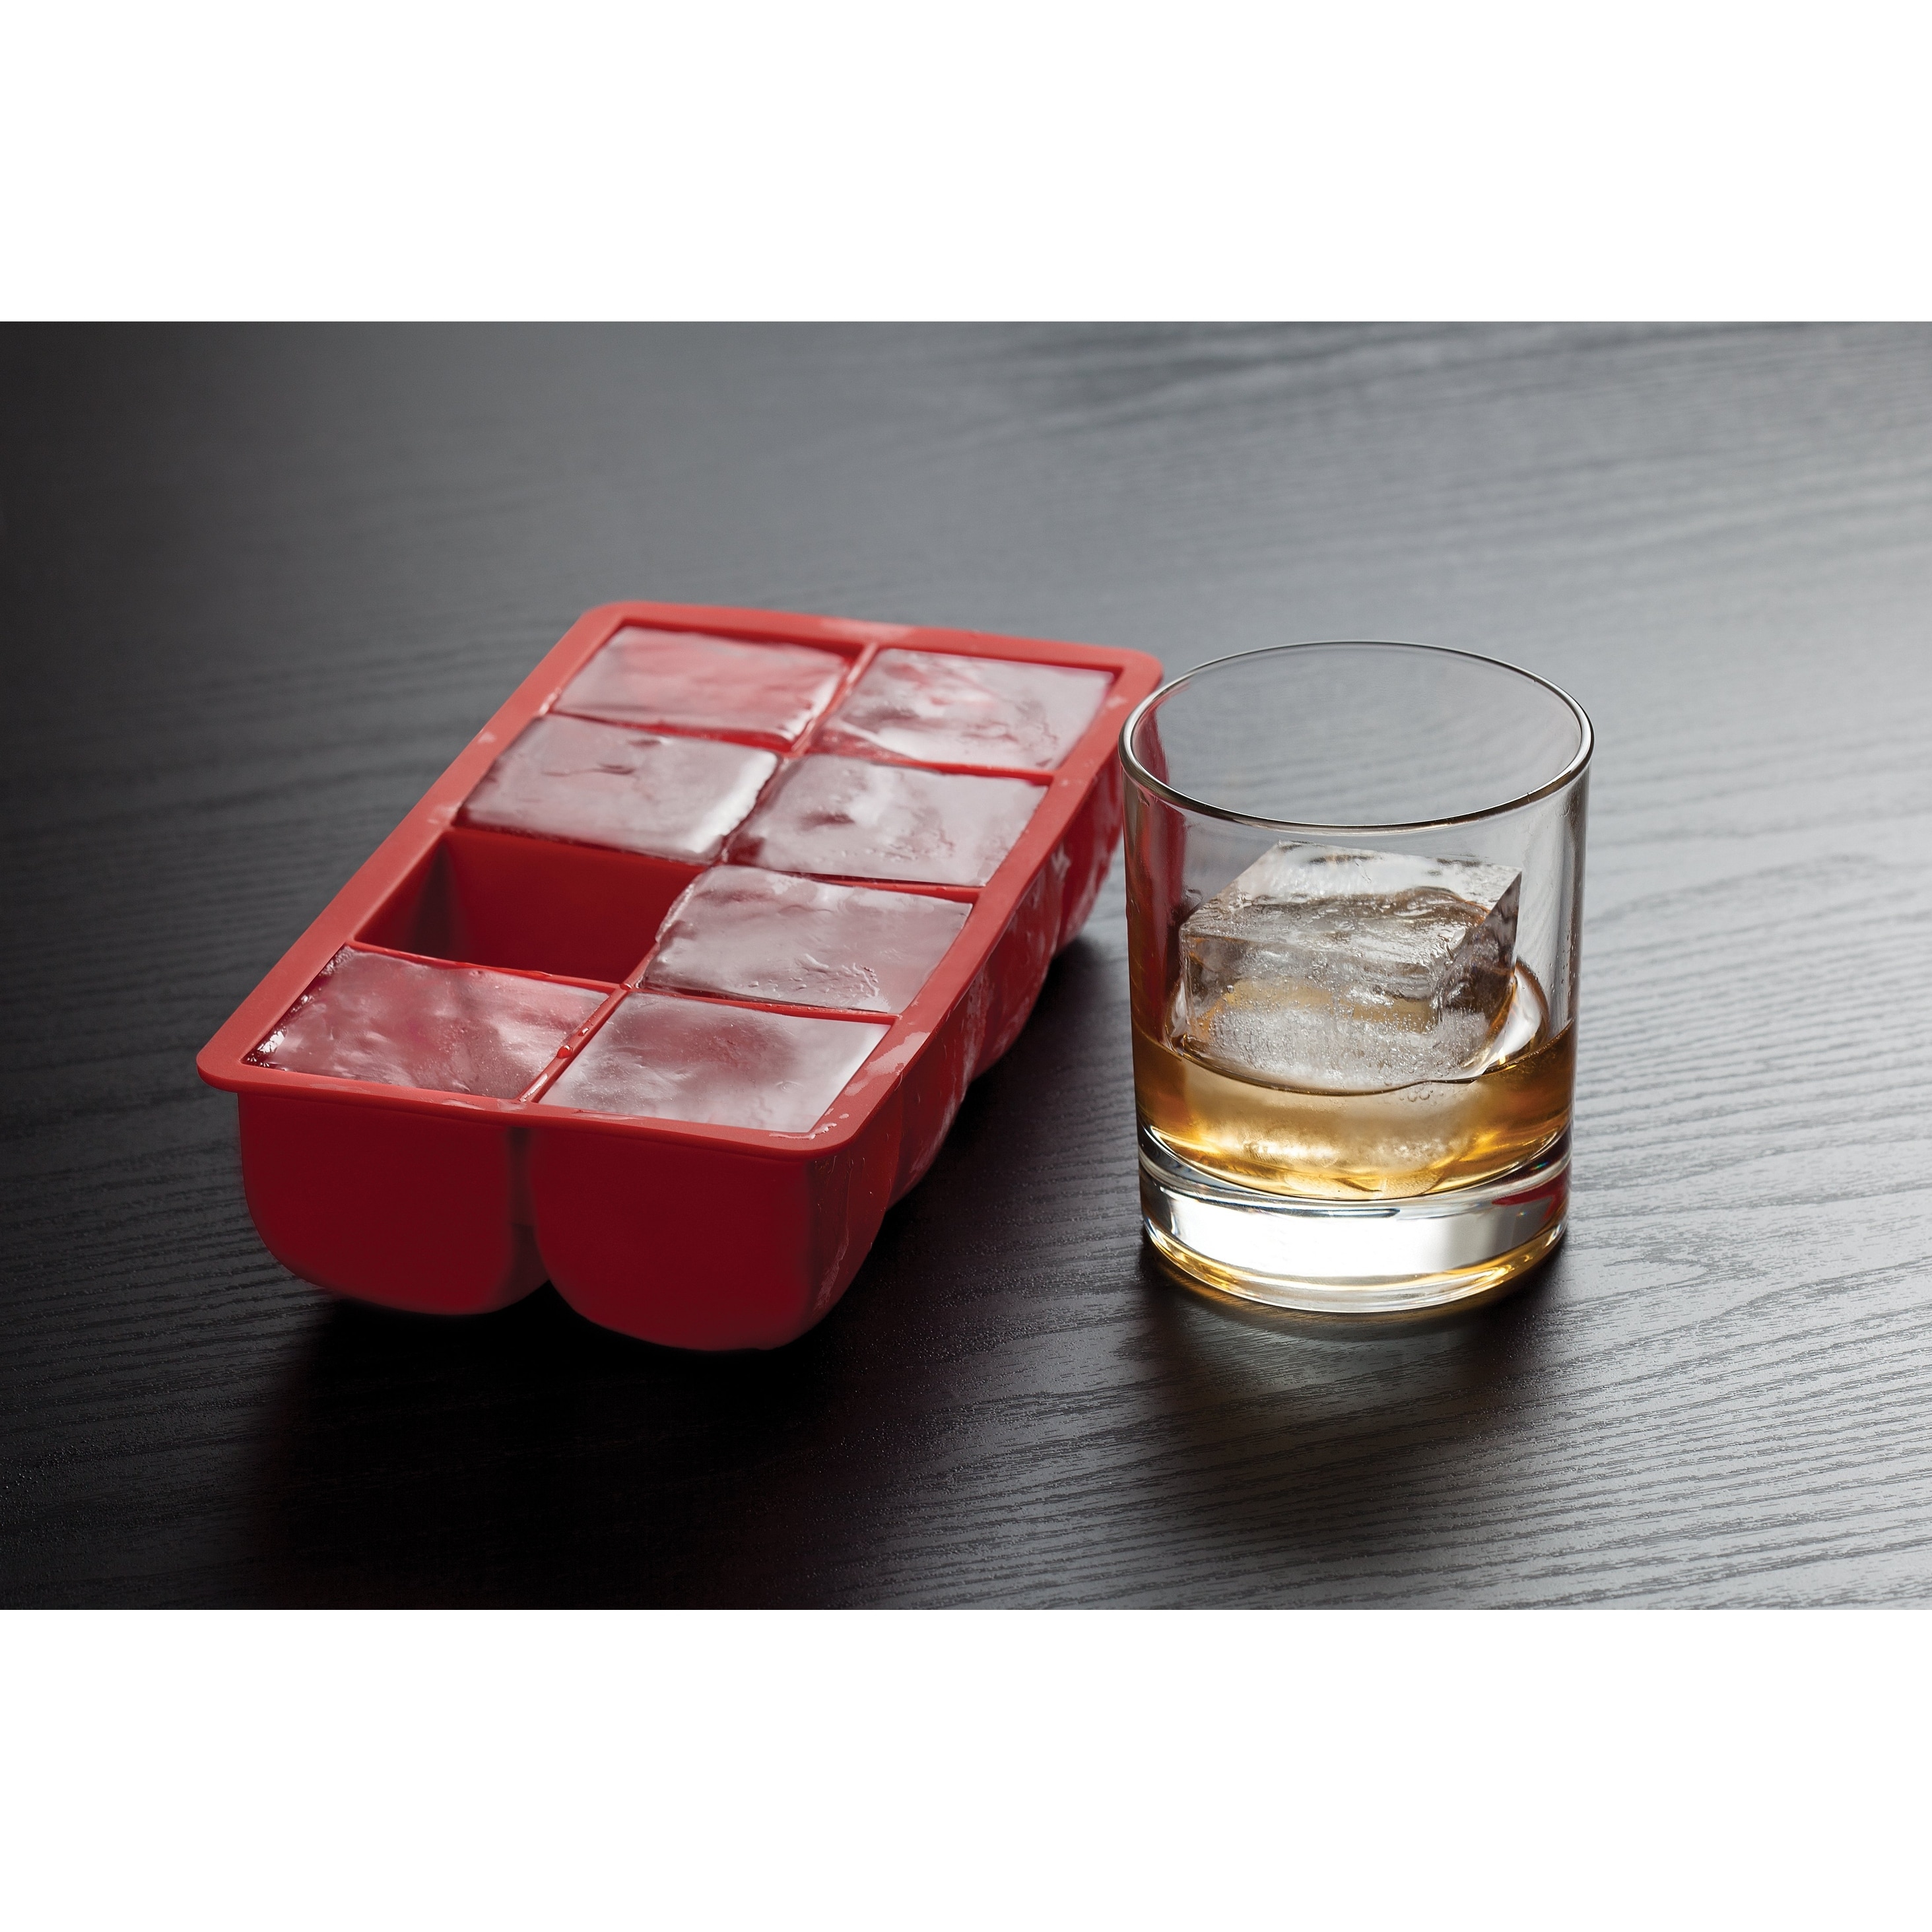 https://ak1.ostkcdn.com/images/products/is/images/direct/f345311ab9604e2e4c5b78113a16ee1d66db8fed/HIC-Red-Silicone-Big-Block-Ice-Cube-Tray-and-Baking-Mold---Makes-8-Oversized-Cubes.jpg